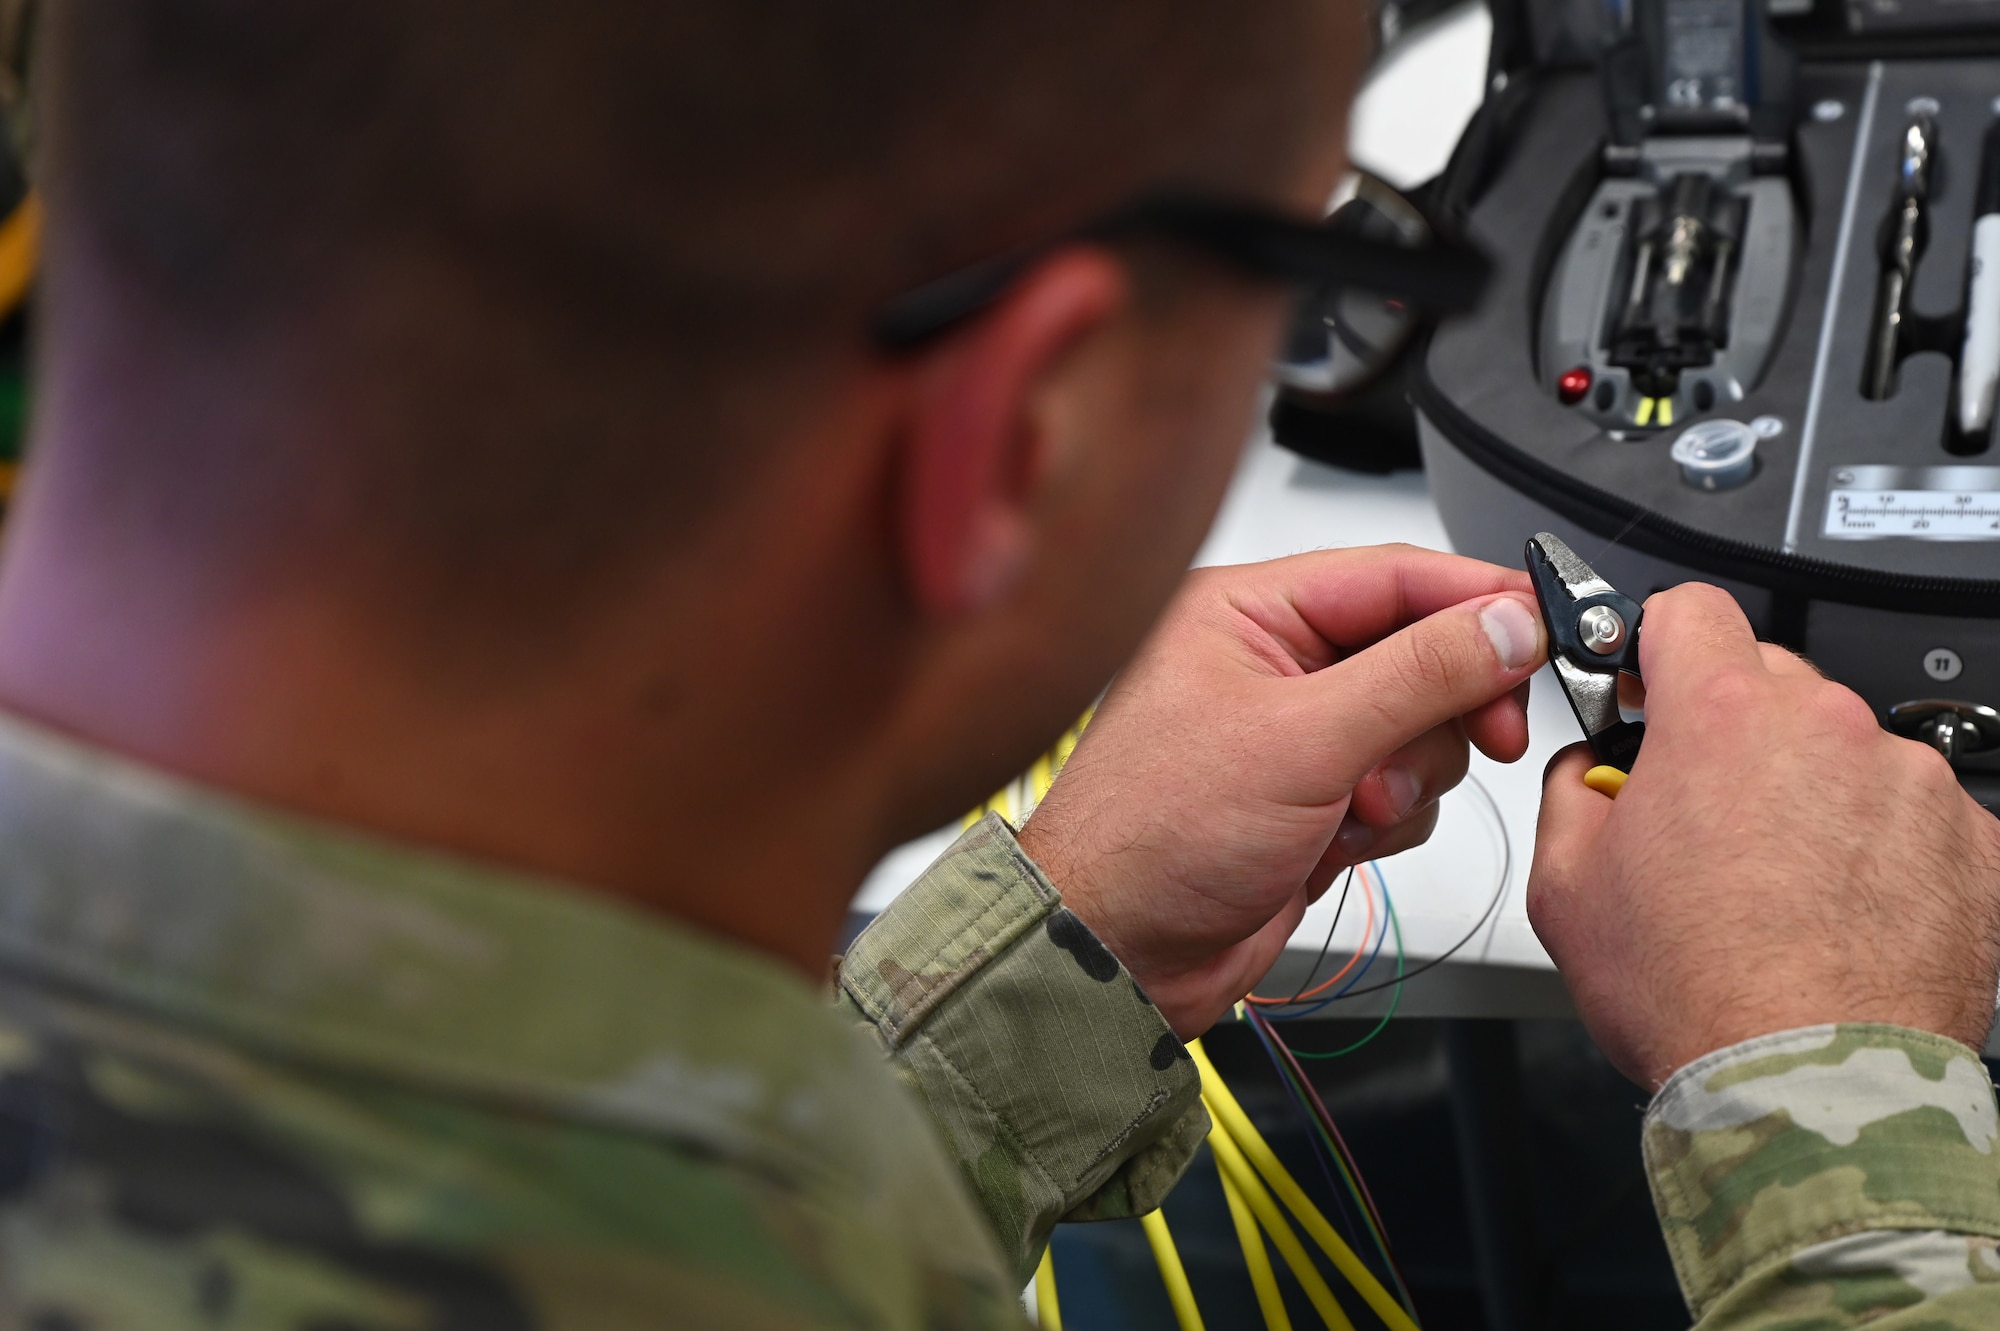 U.S. Air Force Senior Airman Brandon Allen, 1st Communication Maintenance Squadron cable and antenna theater maintenance technician, strips a wire during a demonstration at Ramstein Air Base, Germany, July 13, 2021. The 1st CMXS is responsible for ensuring their customers are supported with network and cable infrastructure so they can do their jobs without the worry of degraded communication capabilities. (U.S. Air Force photo by Senior Airman Thomas Karol)